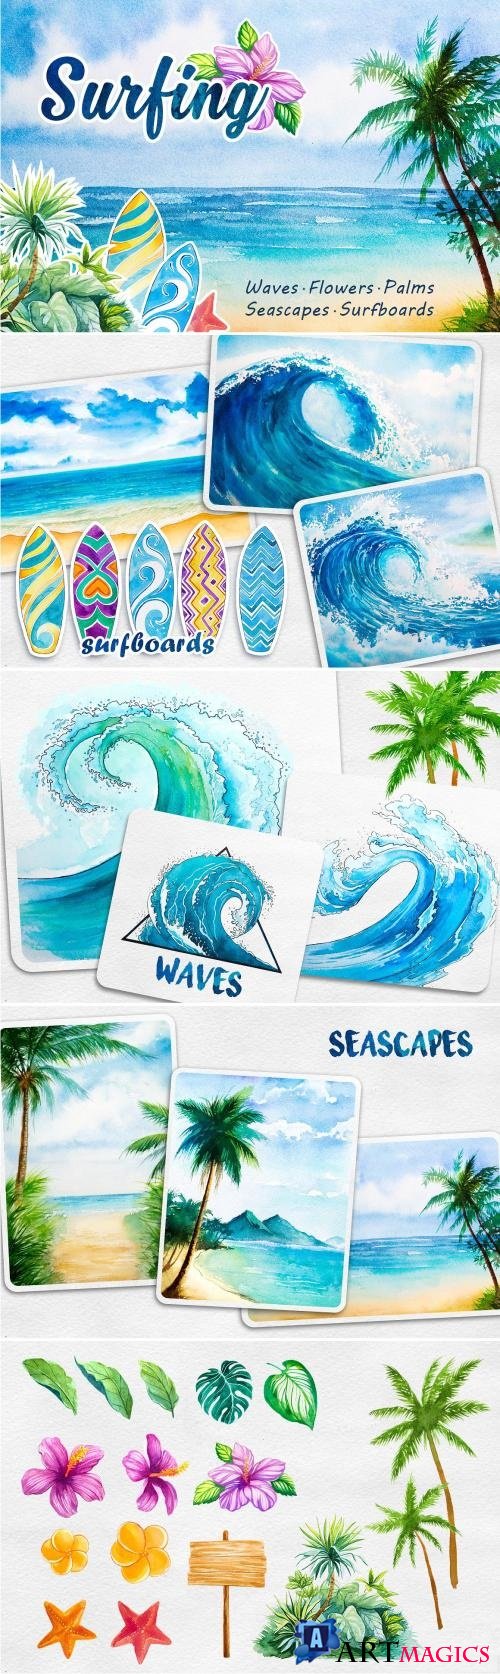 Surfing. Watercolor set - 1636594